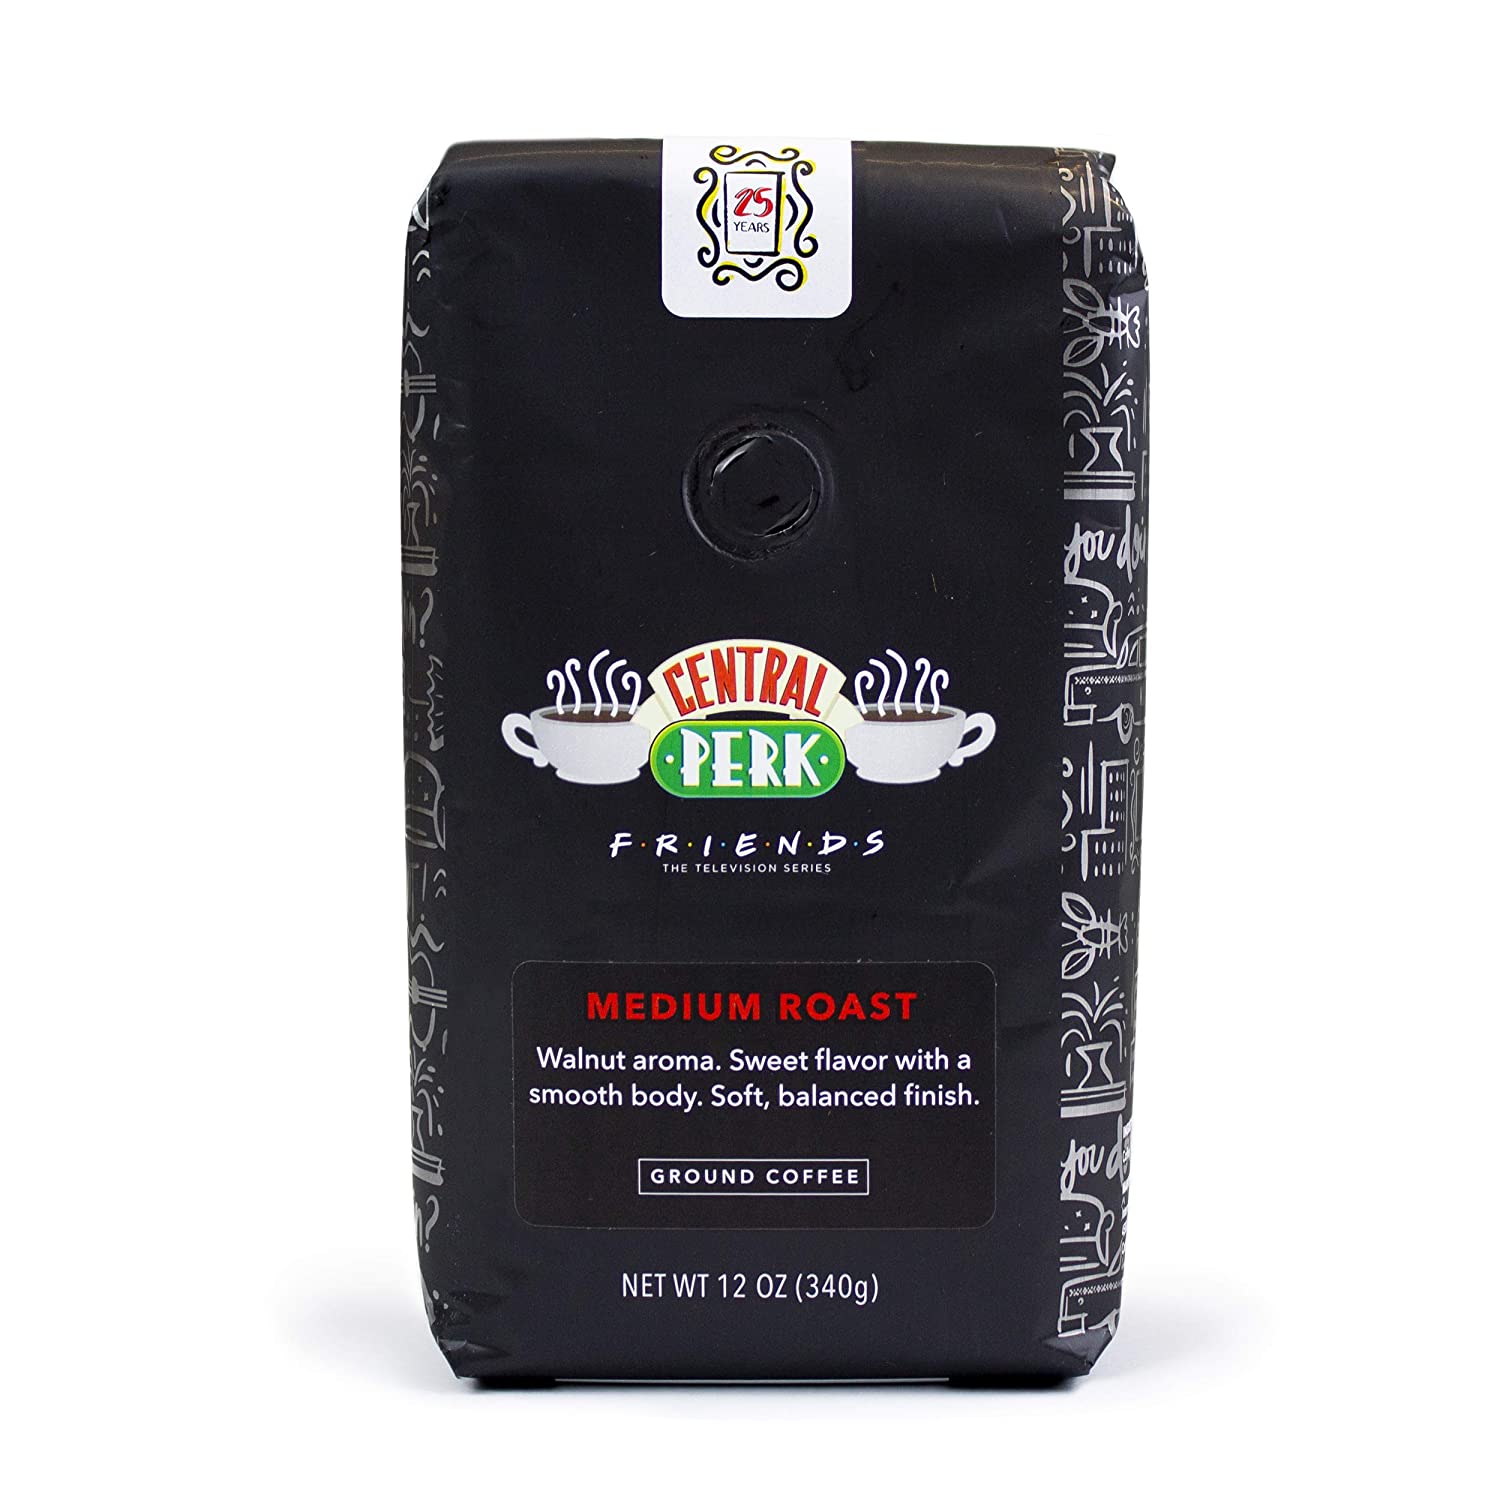 "Friends" Limited Edition Central Perk Ground Coffee